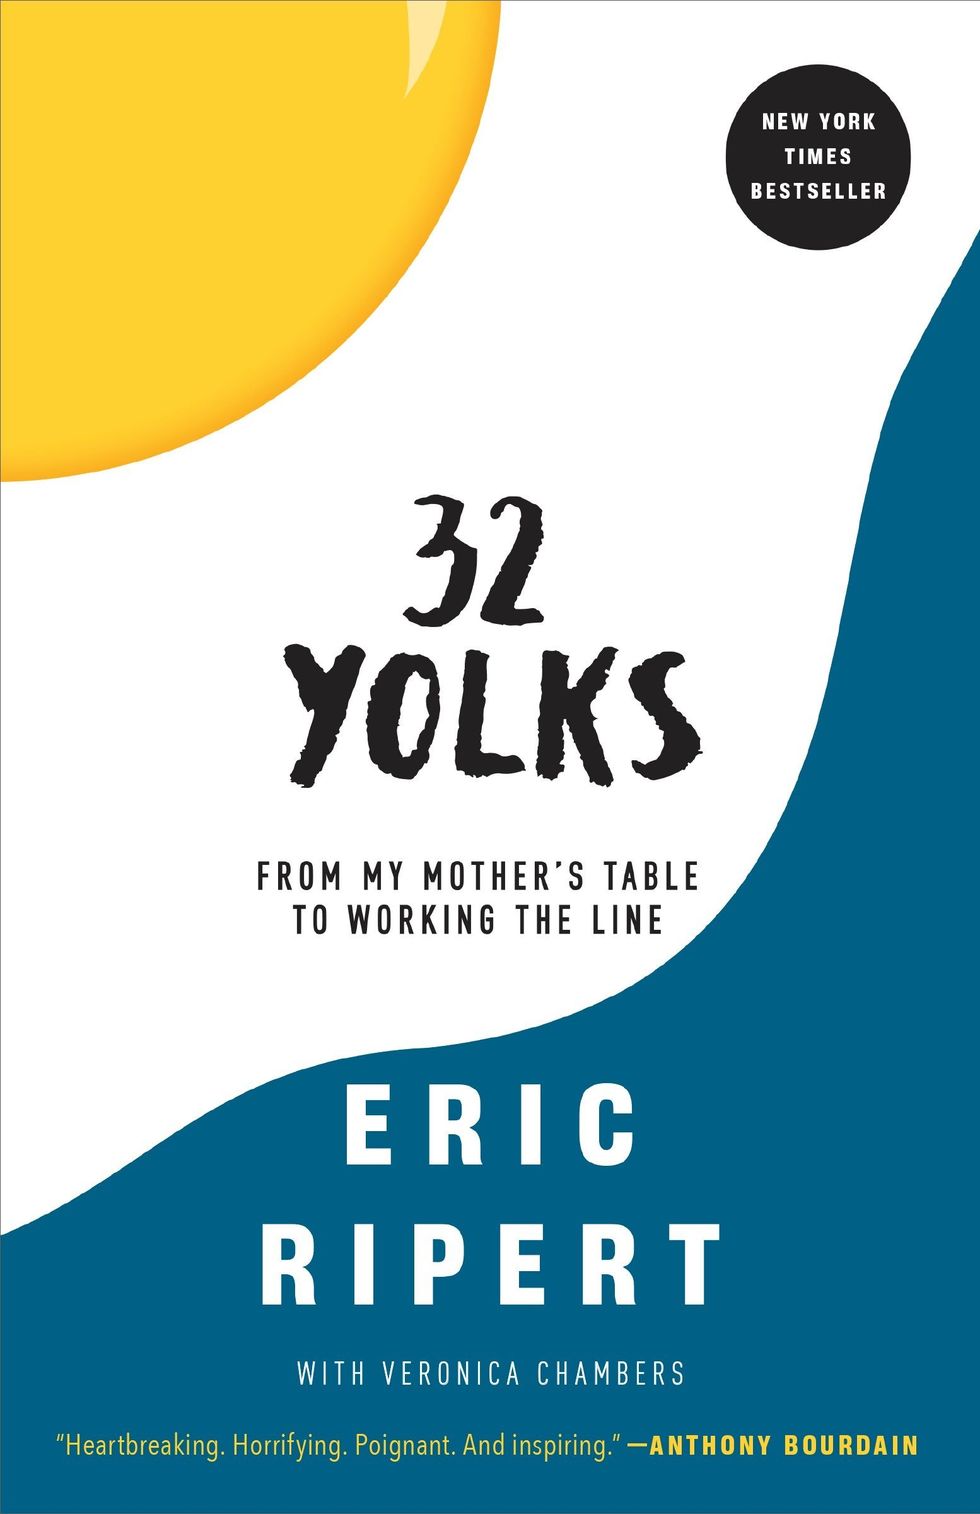 32 Yolks: From My Mother’s Table to Working the Line by Eric Ripert (2016)